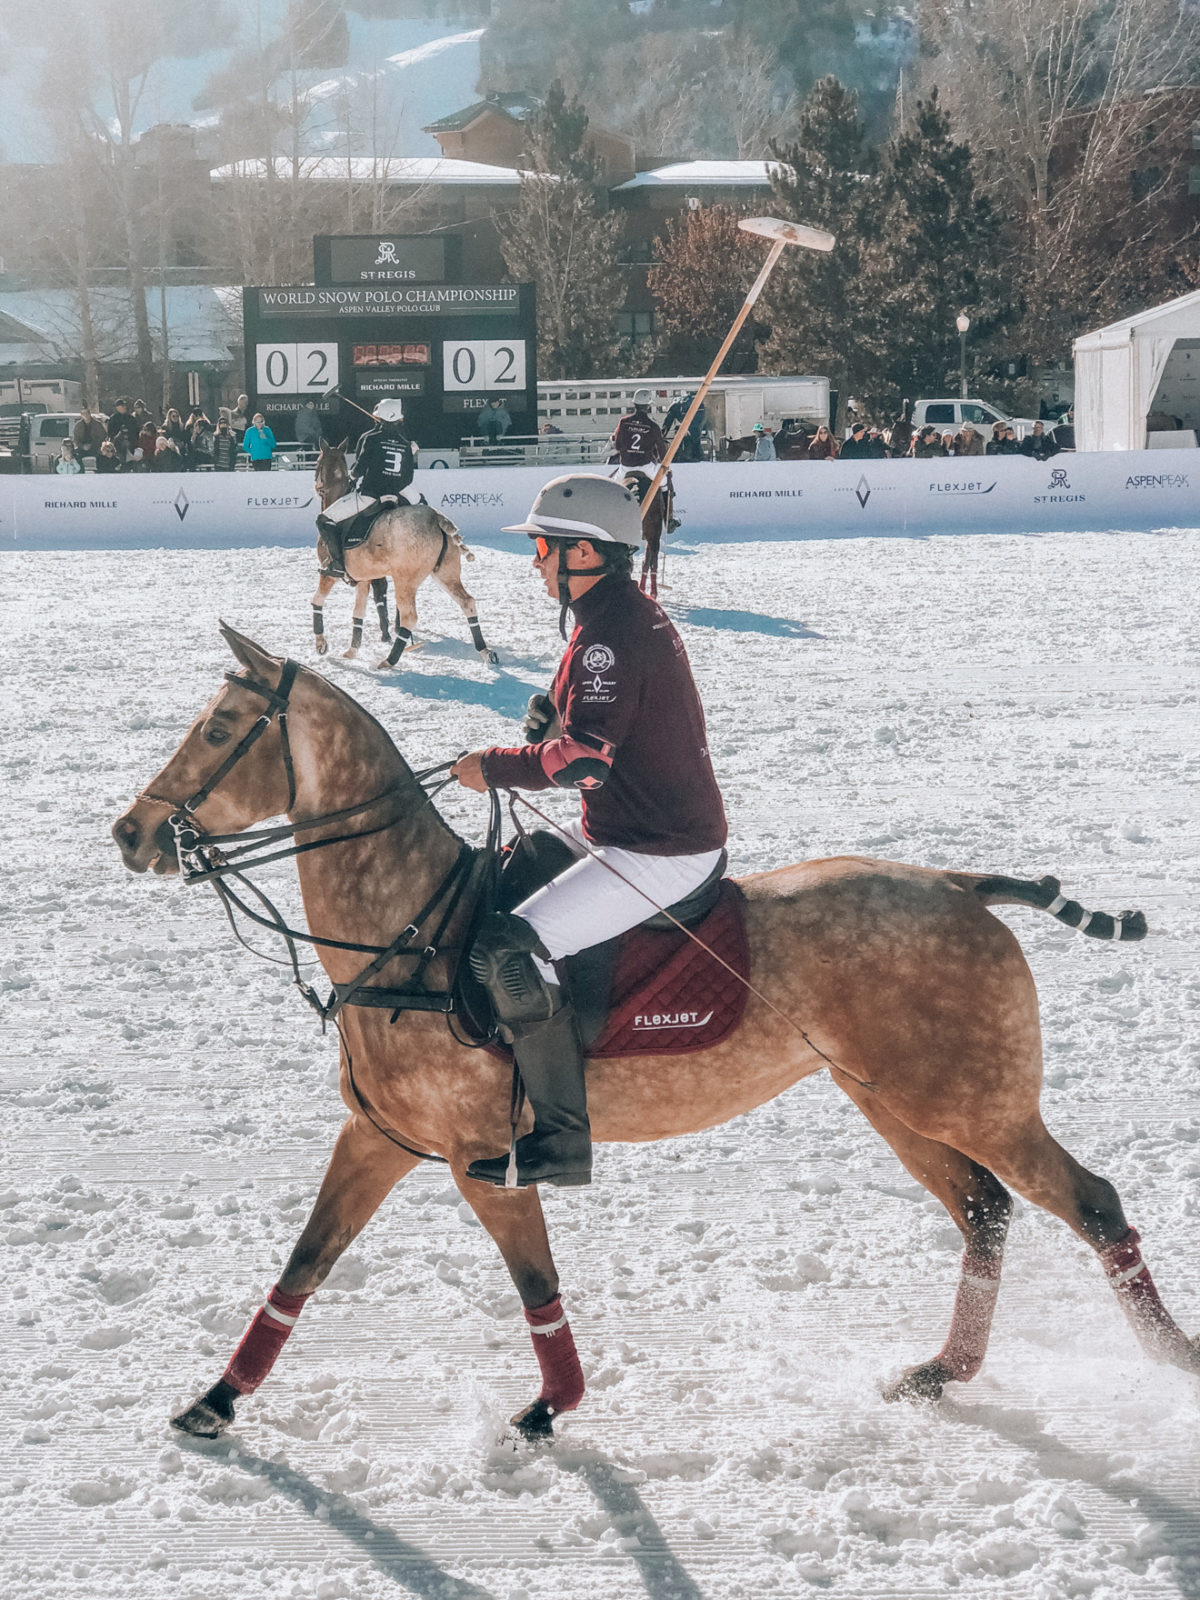 The Best St. Regis Aspen Travel Guide by featured by top Los Angeles Travel Blogger, Laura Lily : image of the Midnight Supper at the St Regis Aspen: image of a snow polo match